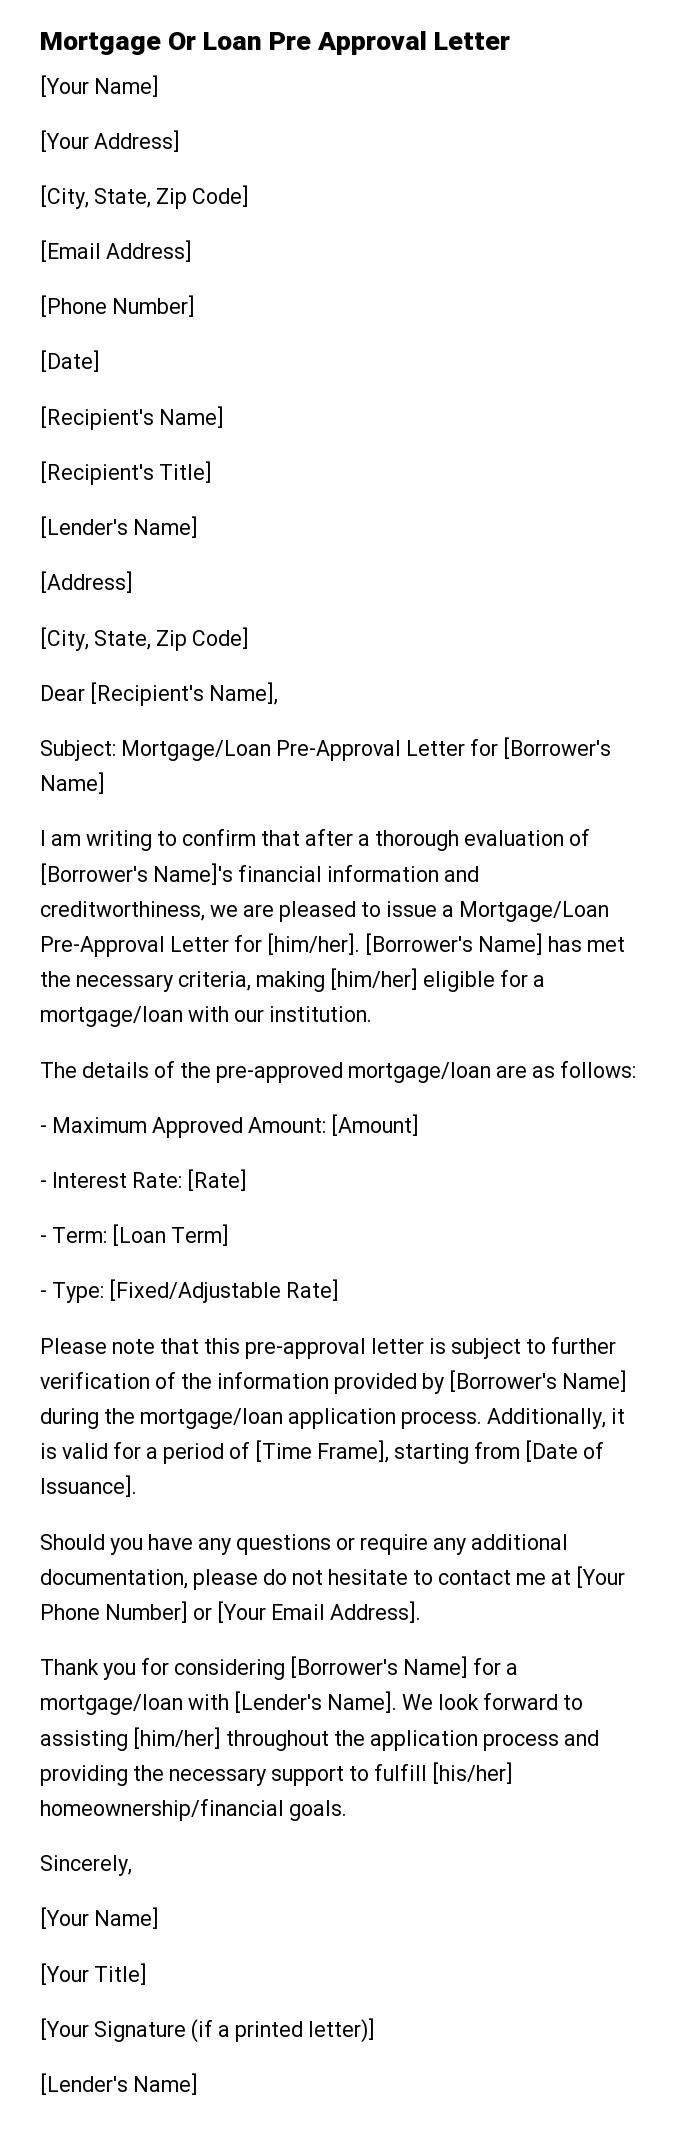 Mortgage Or Loan Pre Approval Letter